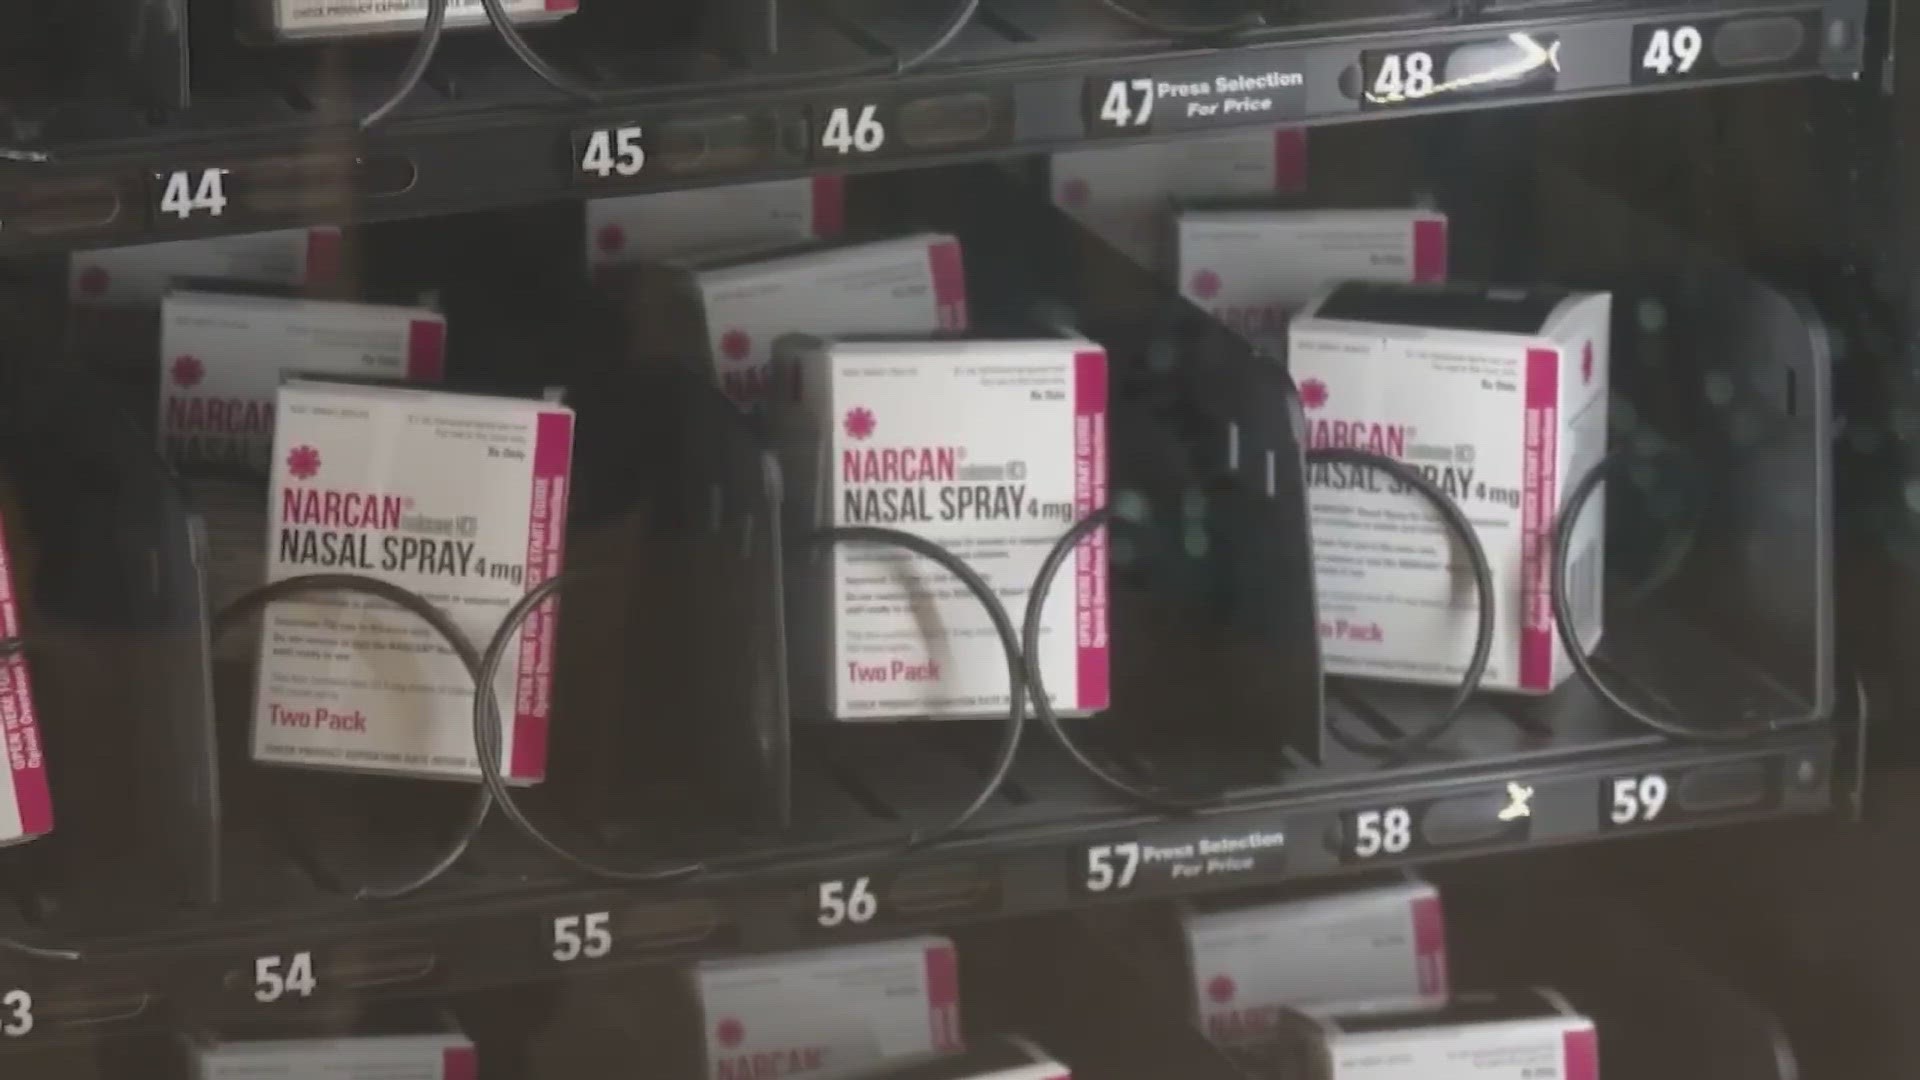 Santa Clara University students said of the Narcan vending machine, you never know when you'll be in a situation where someone might need it to survive.